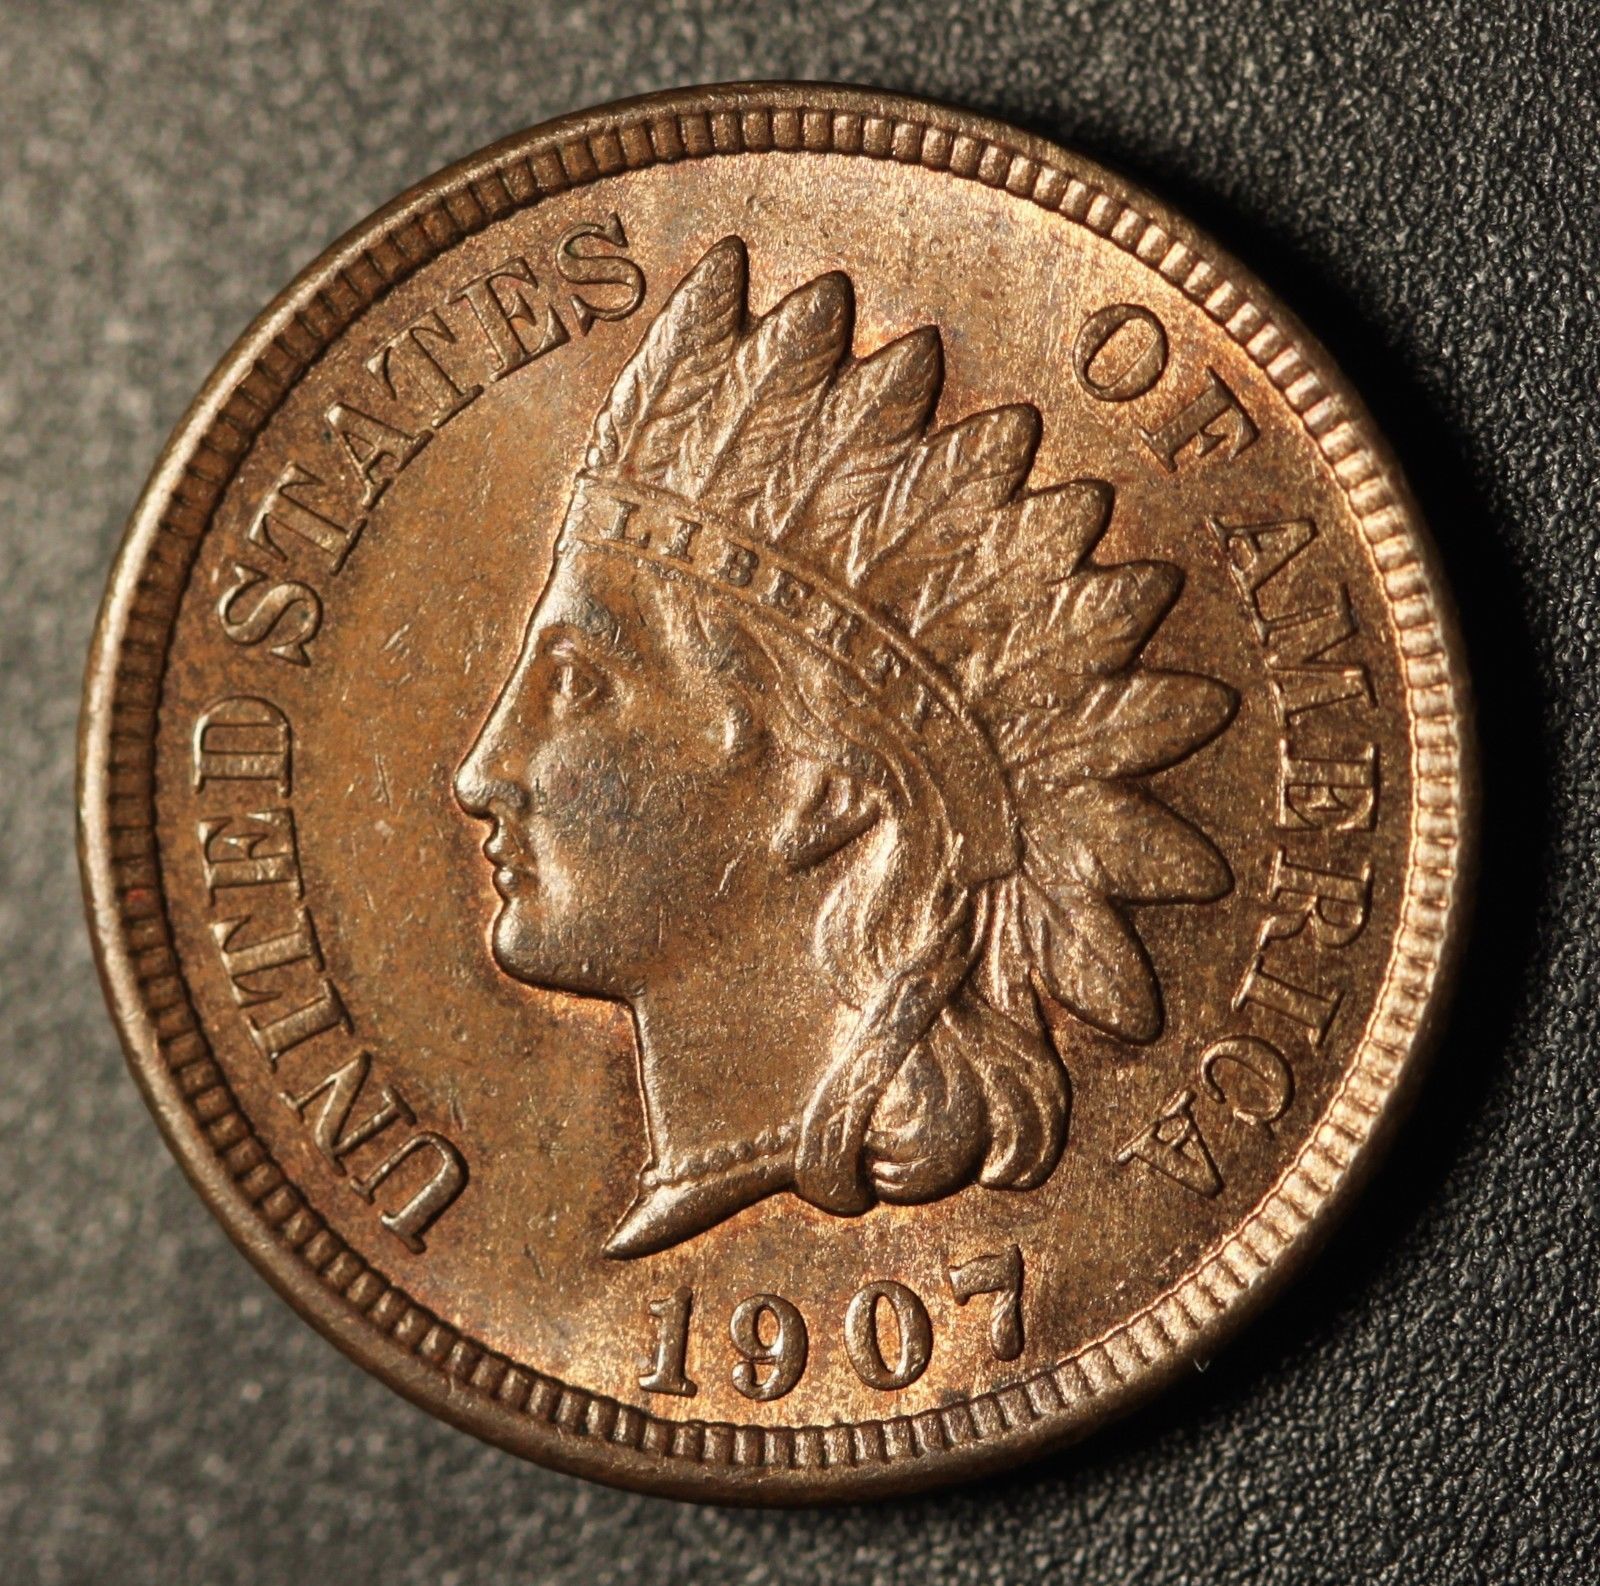 1907 RPD-014 Indian Head Penny - Photo by Ed Nathanson